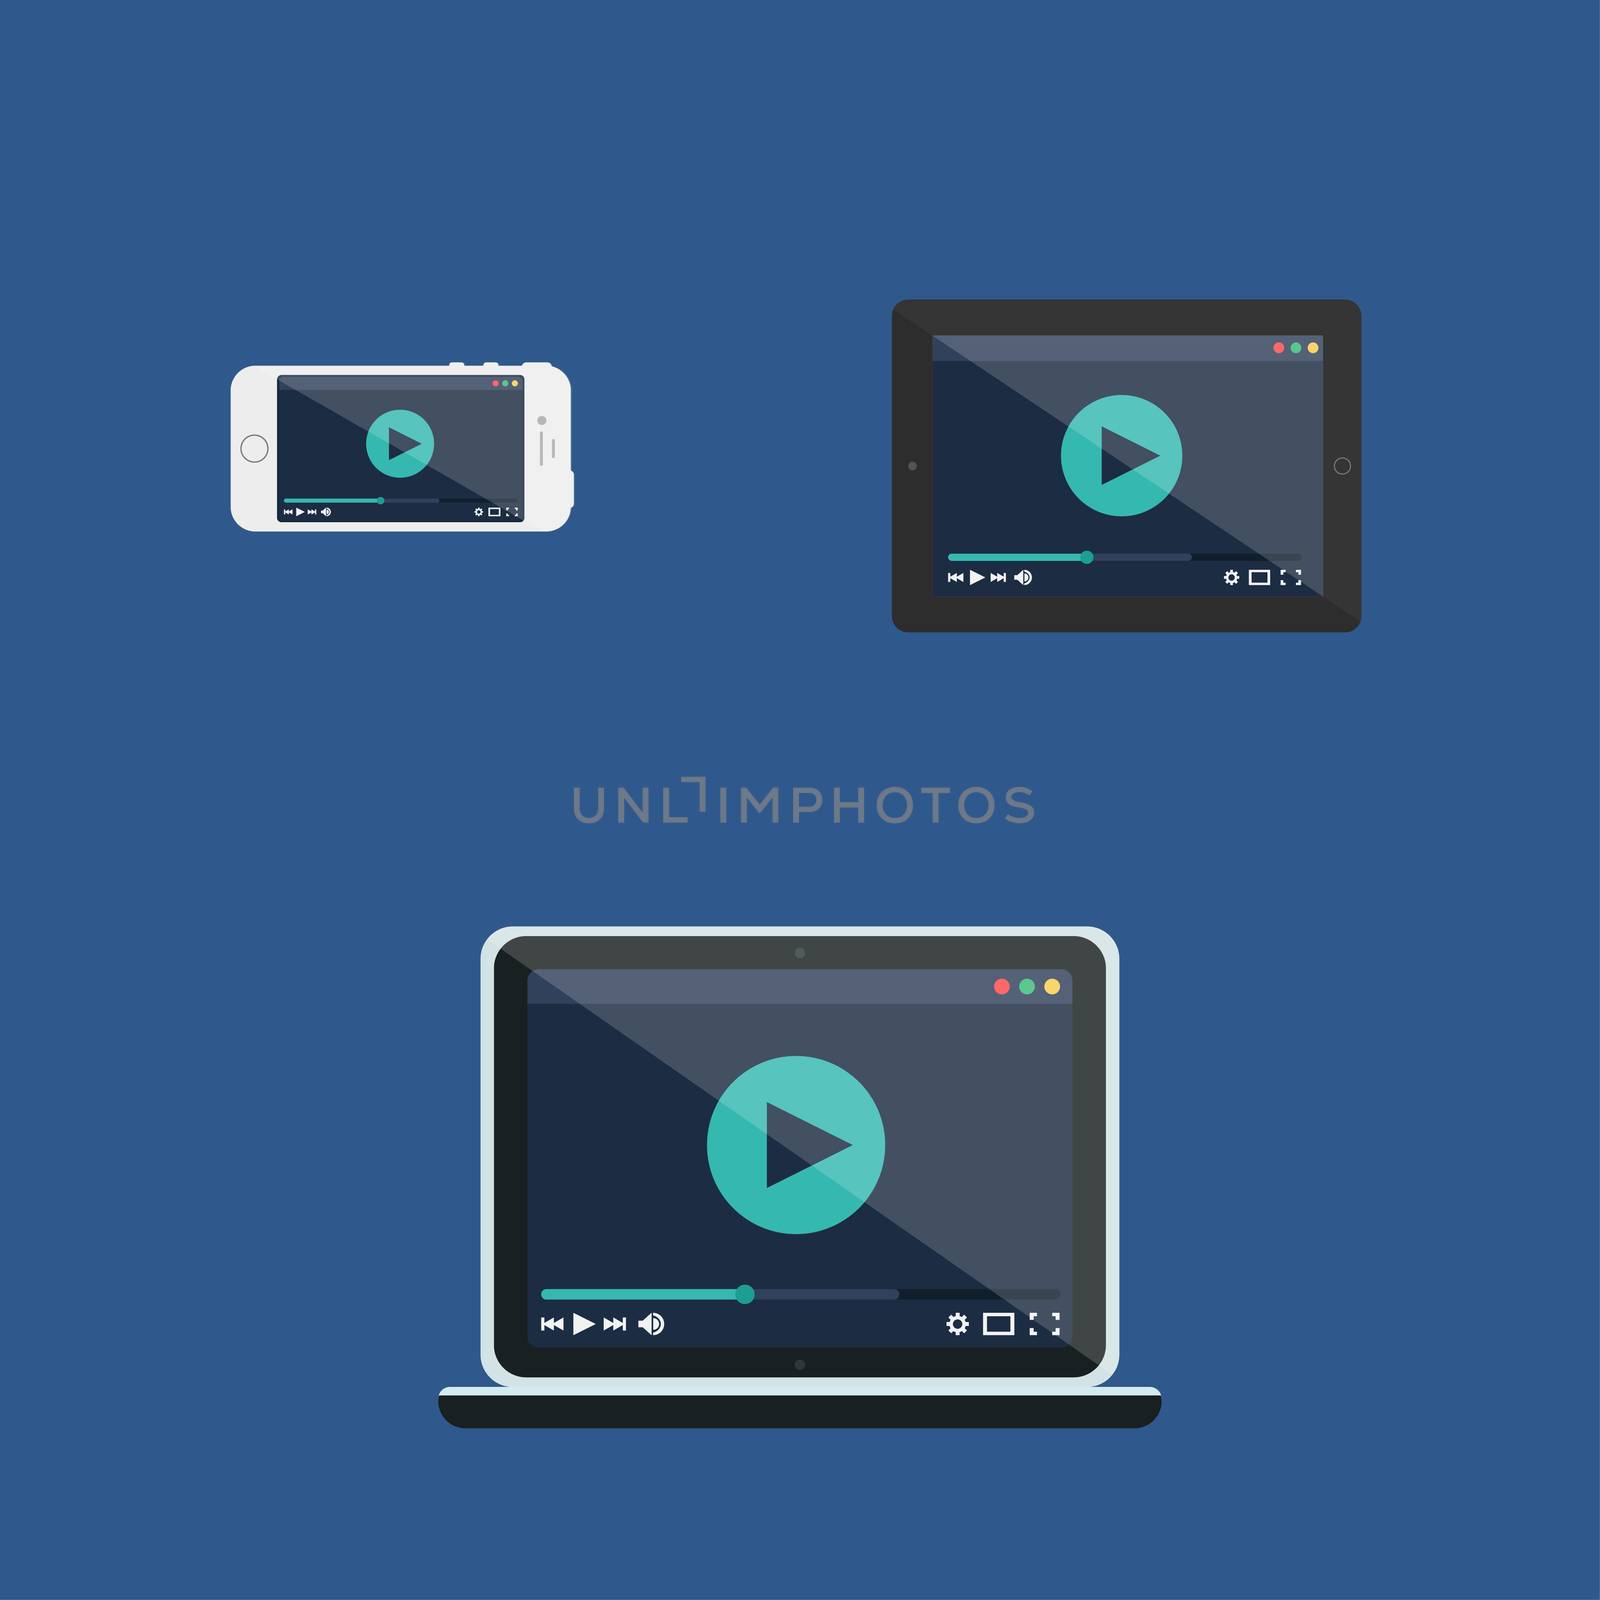 Adaptive Web Template and Gadget Elements for site form of watching online video on Smartphone, Tablet, Notebook. Flat minimalistic pad, phone, laptop mockups. Vector